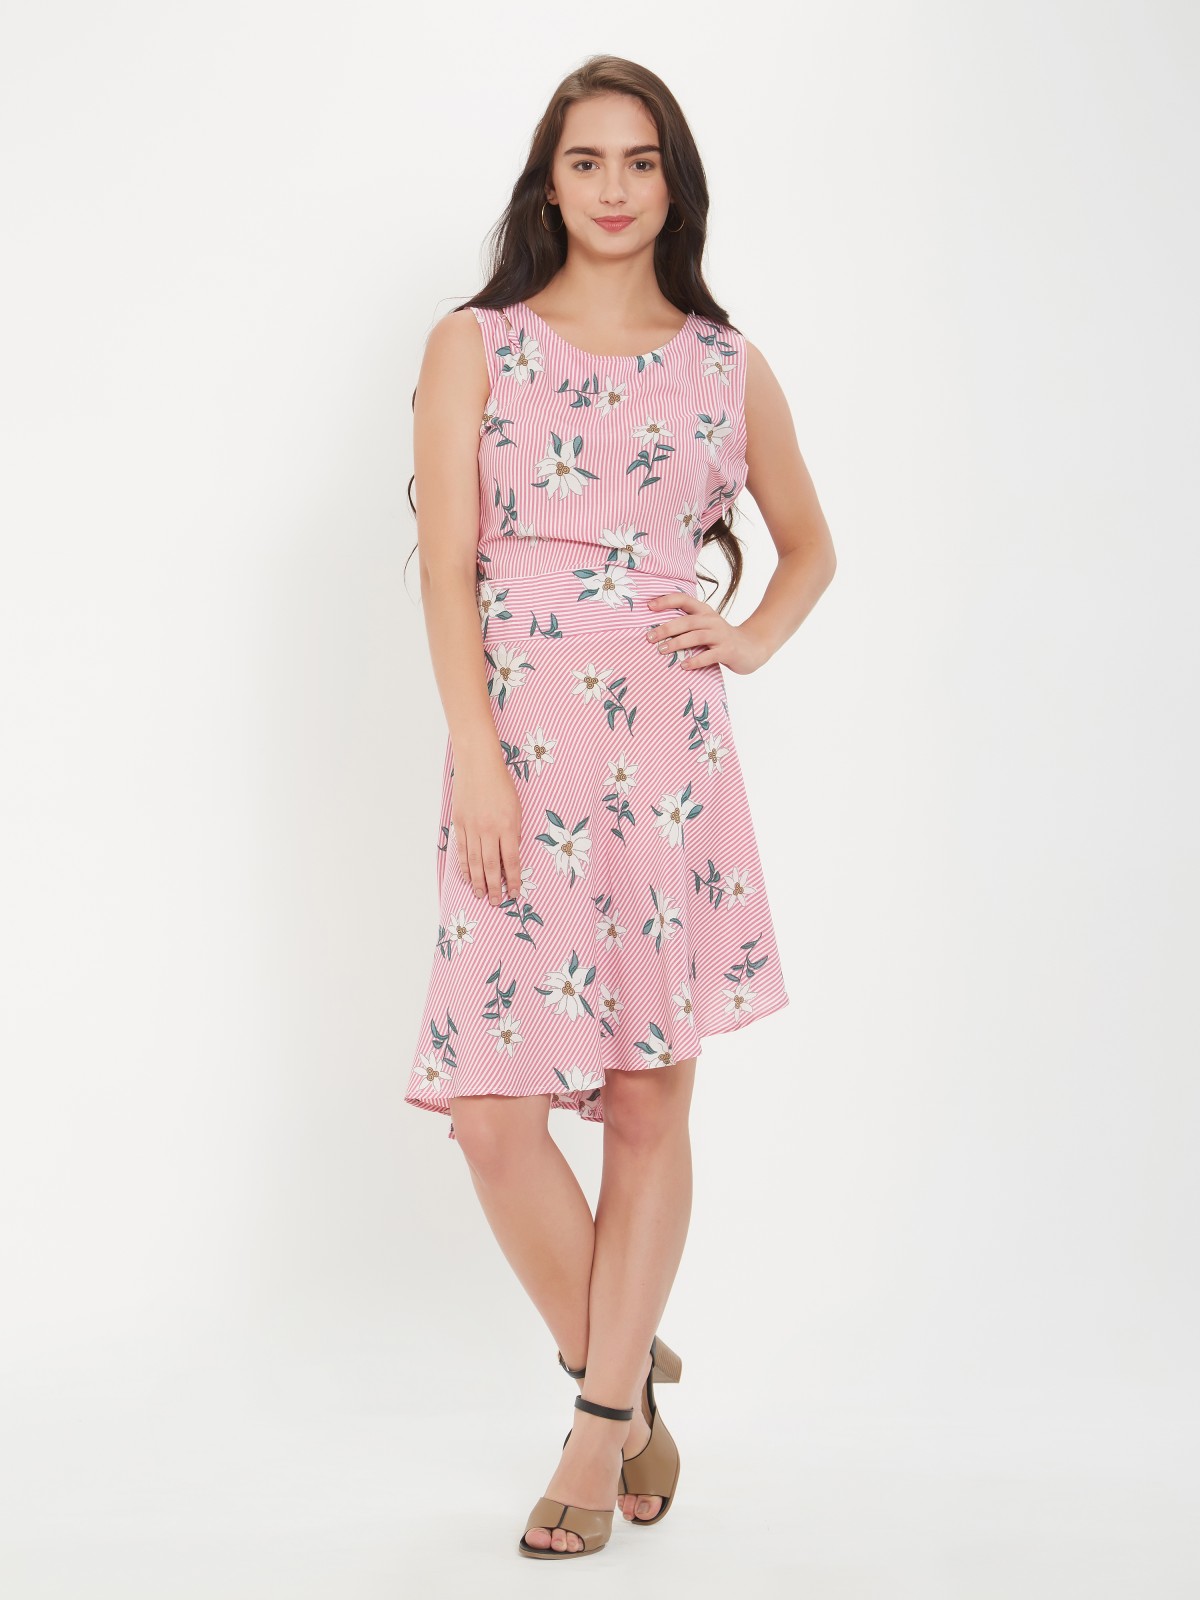 Striped Floral Printed Boat Neck Polkadots A Line Dress